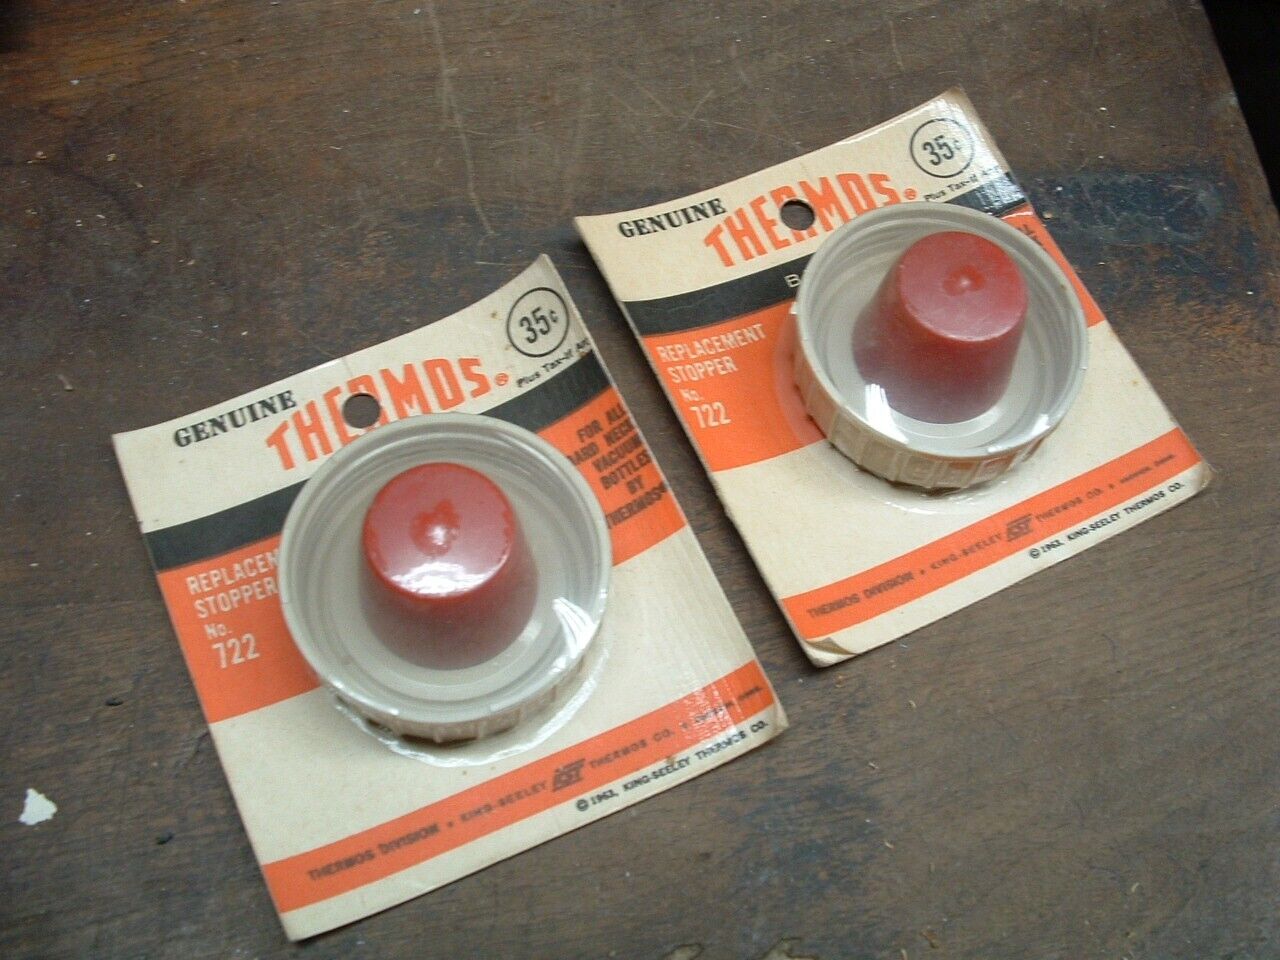 TWO NEW OLD STOCK THERMOS BOTTLE REPLACEMENT STOPPERS FOR ALL STANDARD NECK BOTL